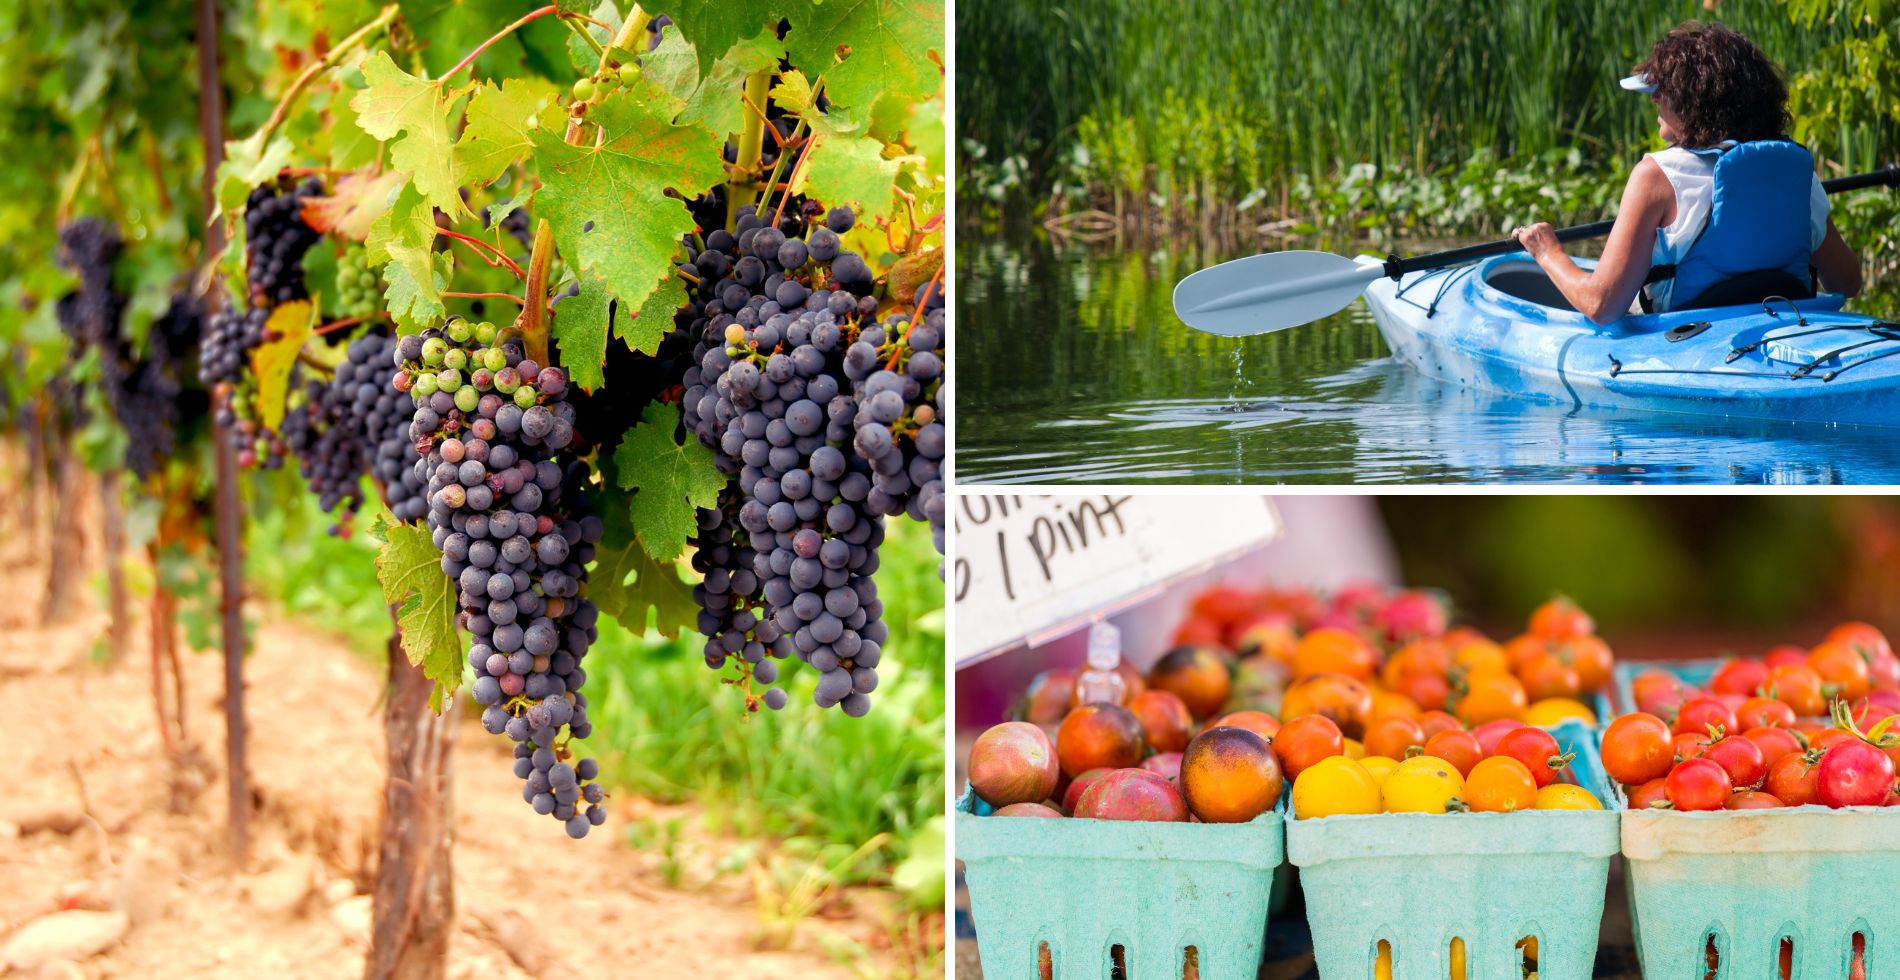 Collage of grapes on the vine, a woman kayaking, and produce at a farmers market